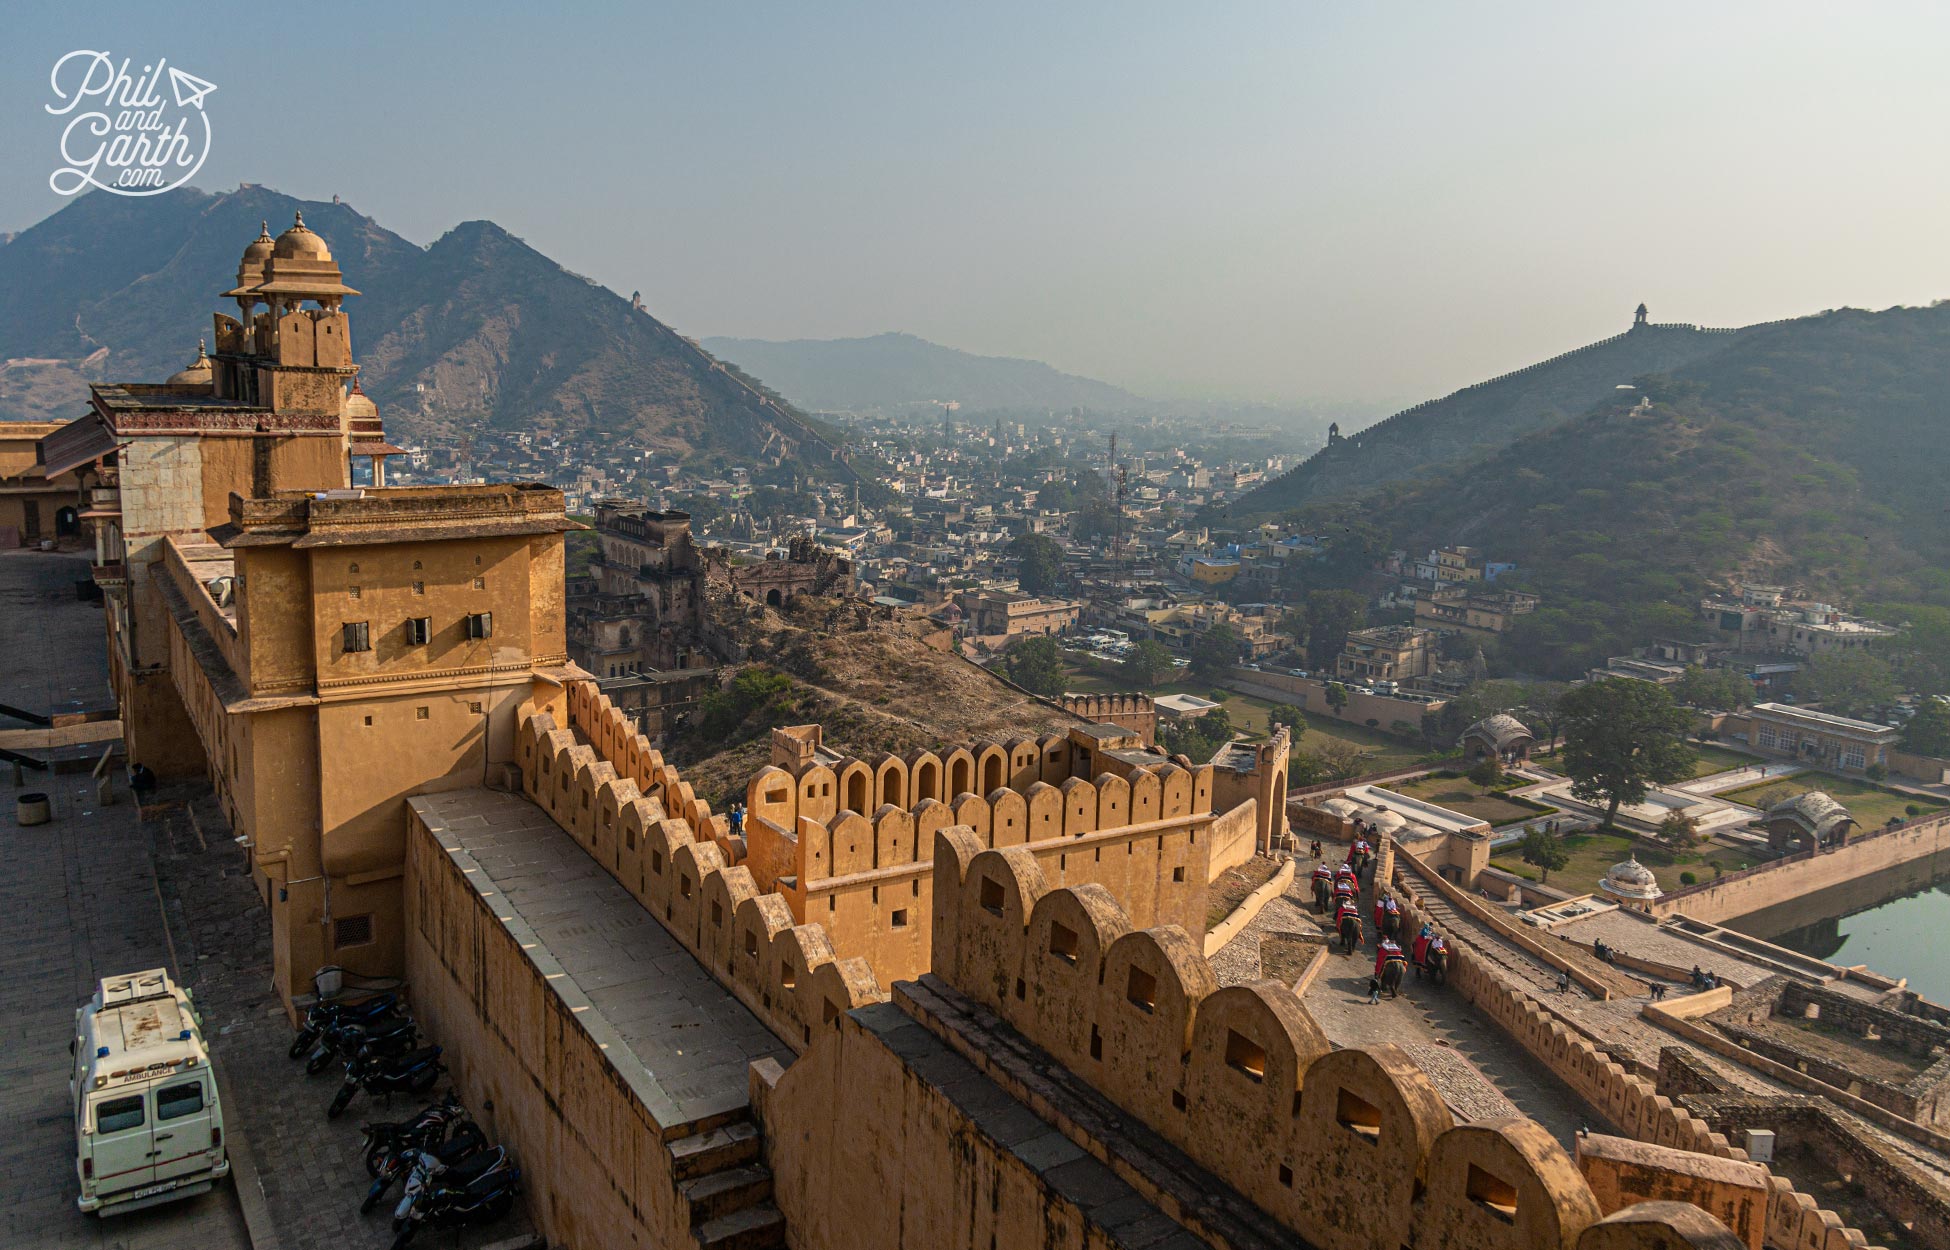 Amber Fort has the 3rd longest wall in the world - it's over 7 miles long